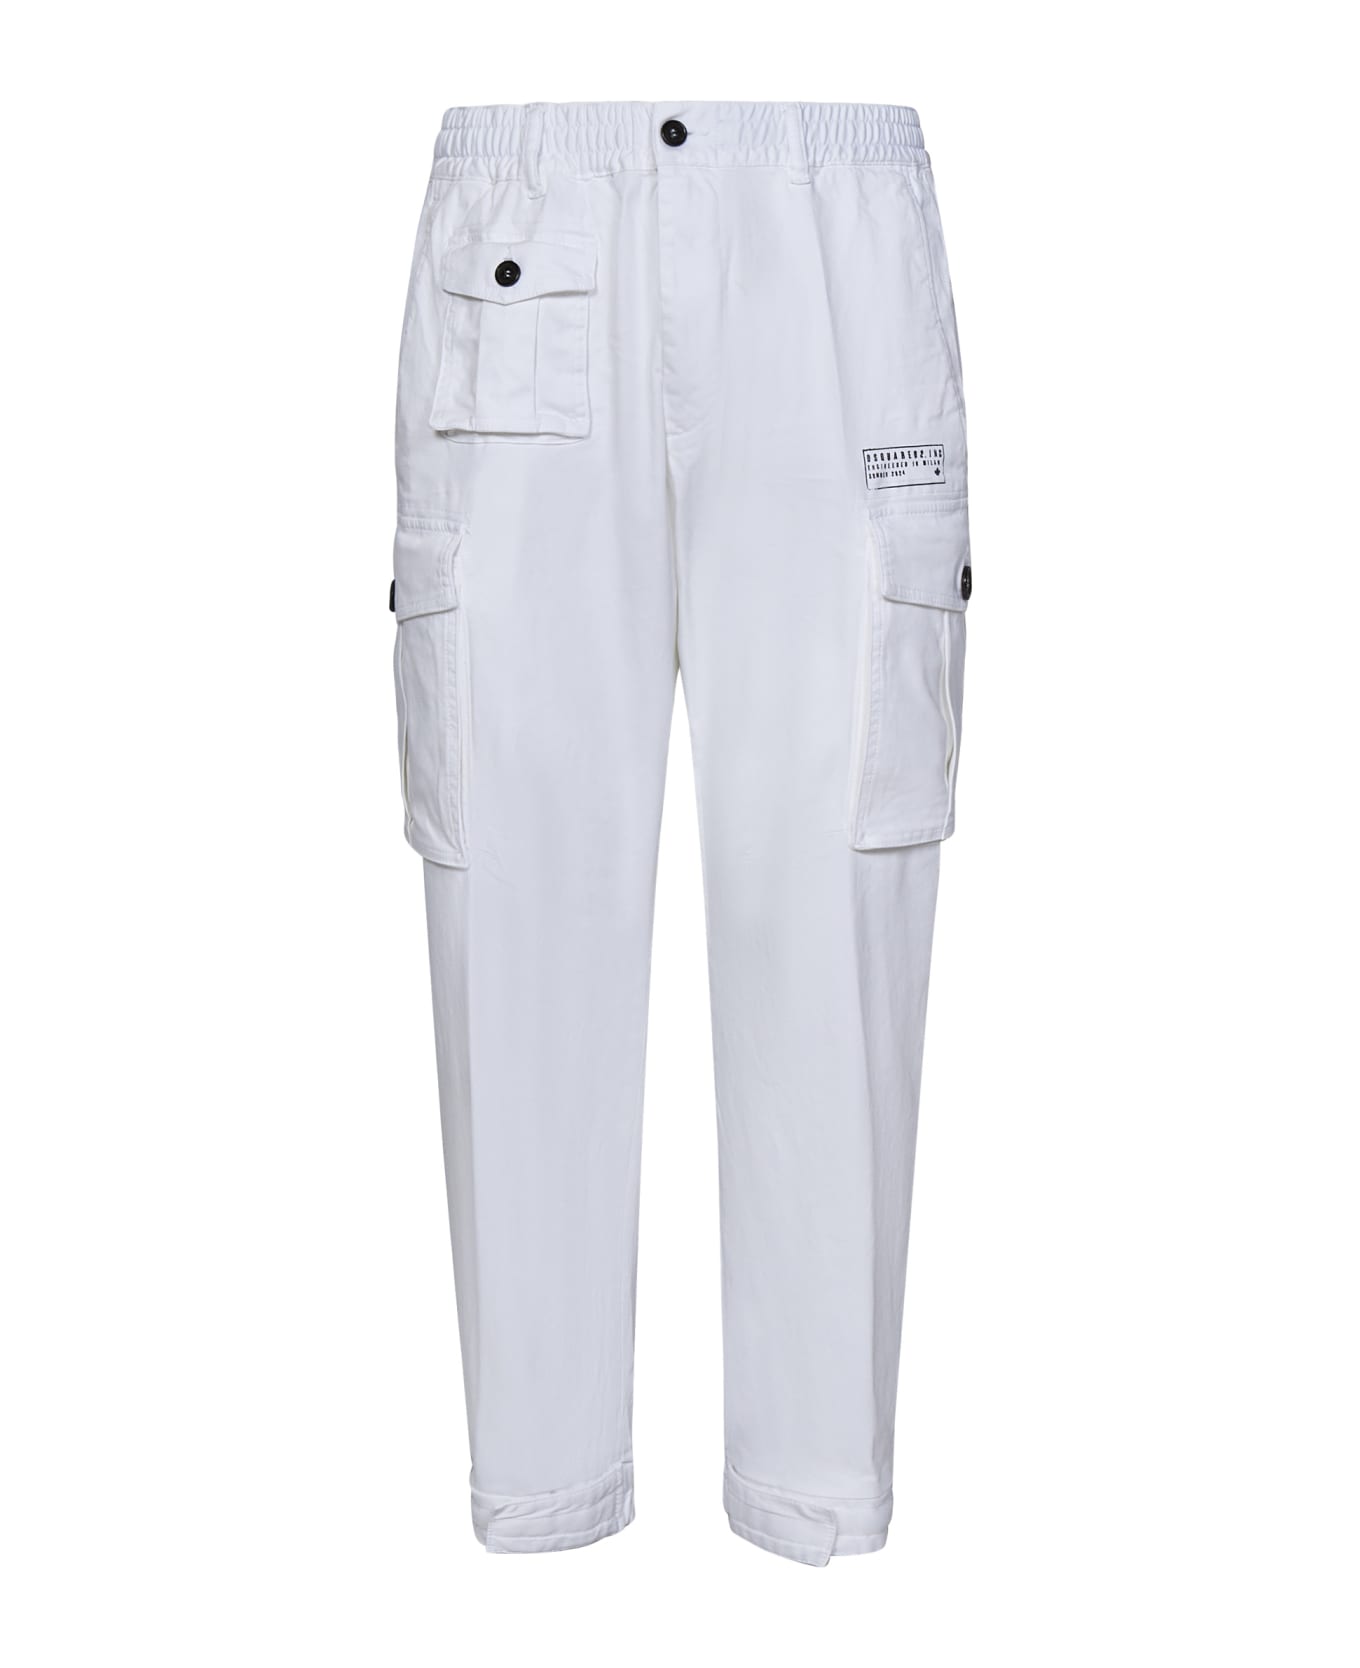 Dsquared2 Urban Cyprus Cargo Trousers - White